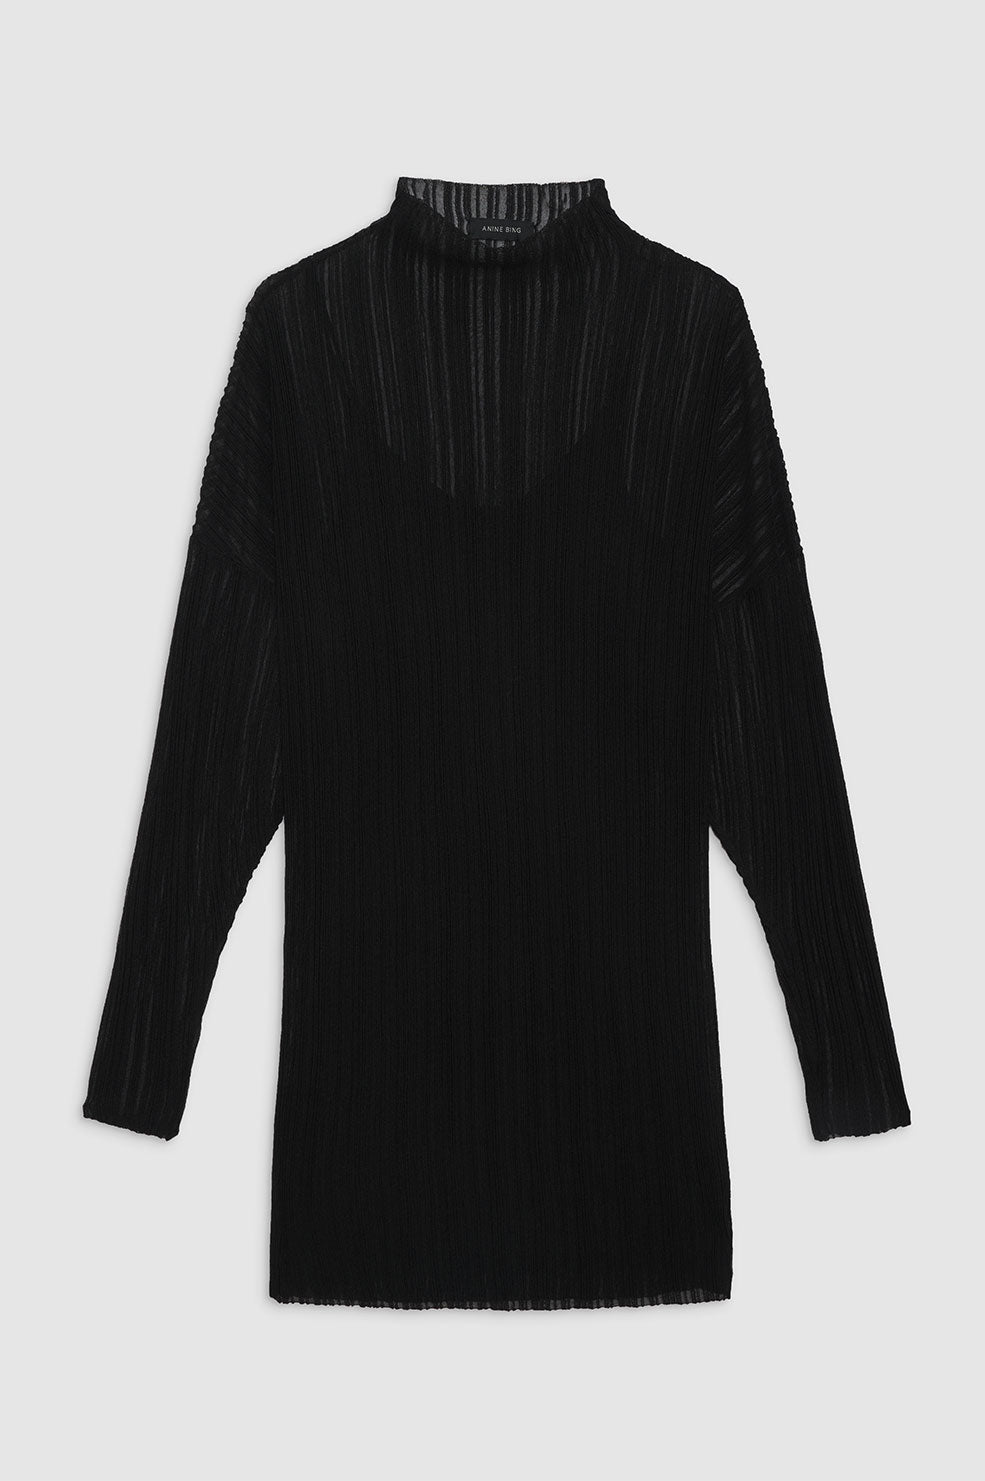 ANINE BING Clare Dress - Black - Front View